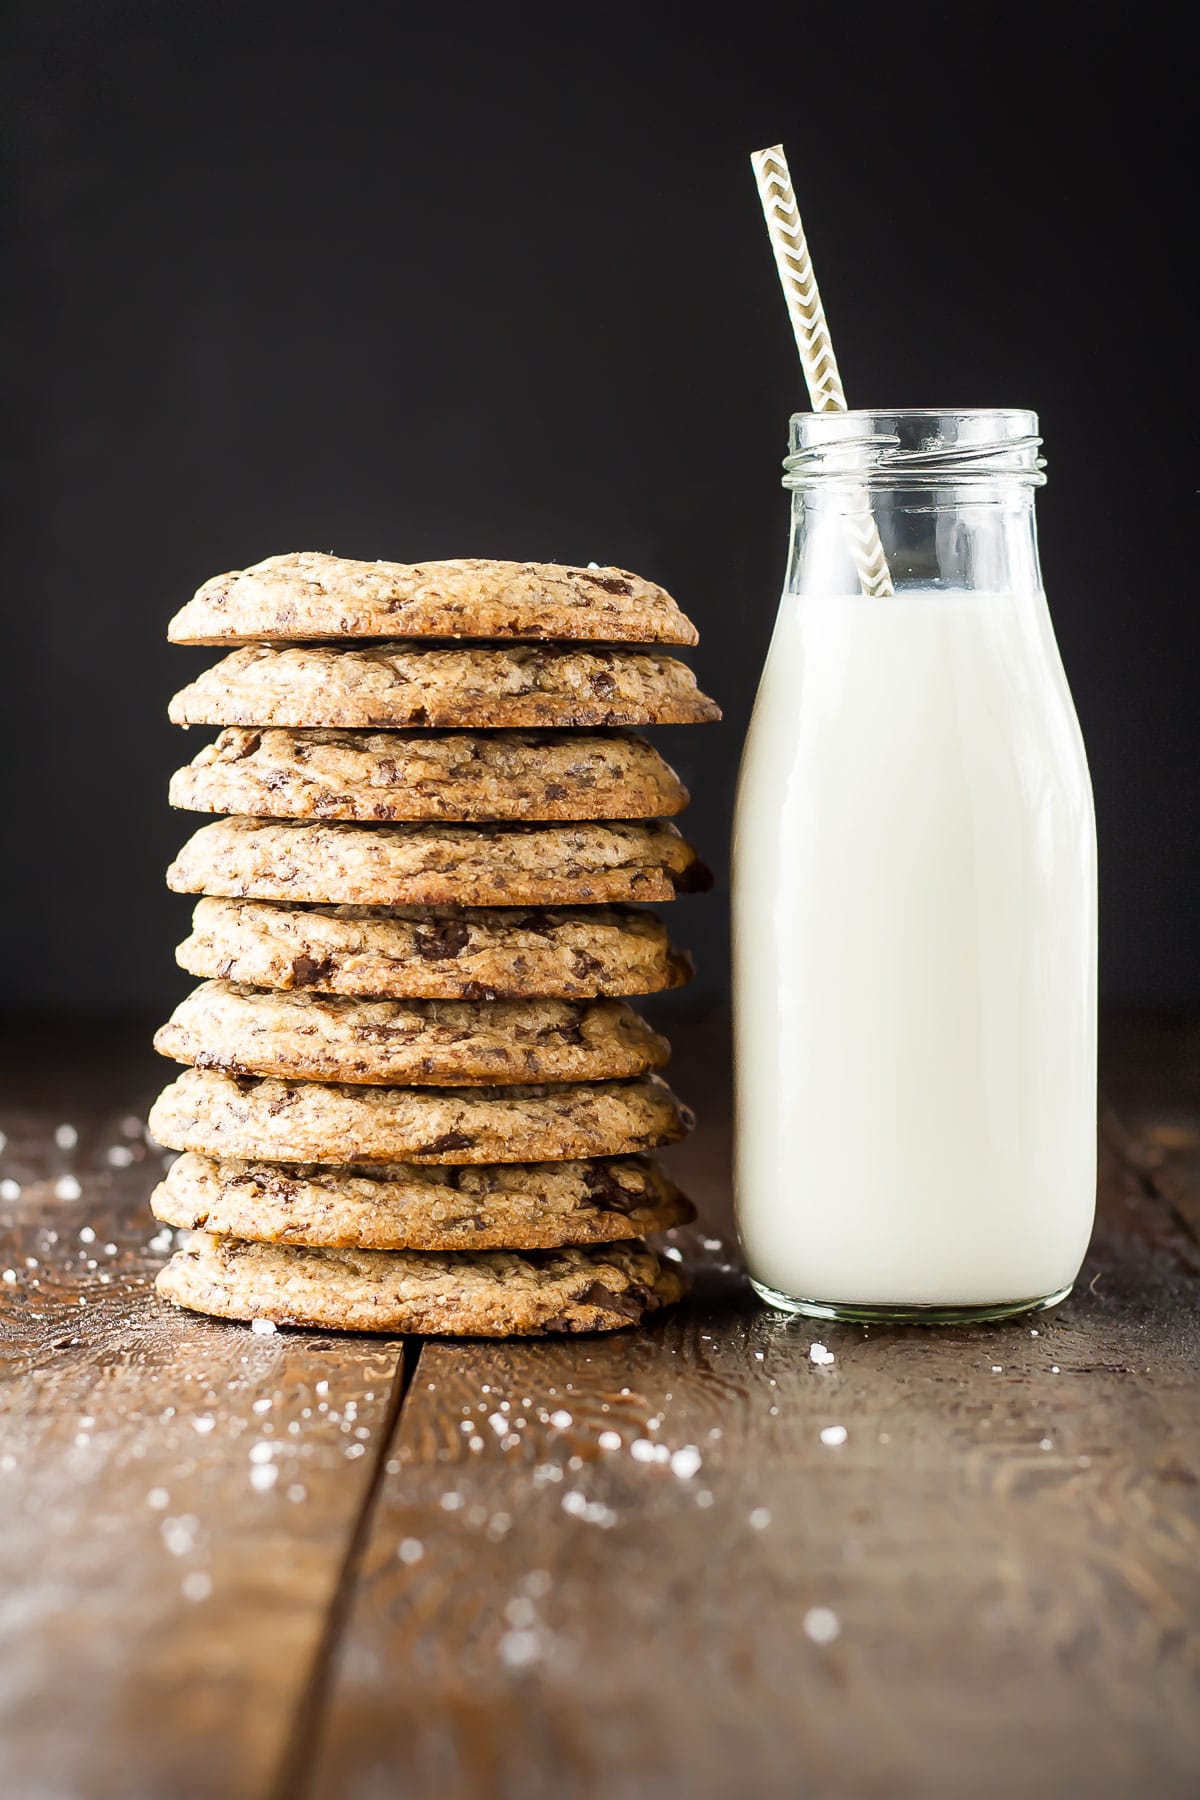 A stack of cookies on a wooden table with a small pitcher of milk beside it.